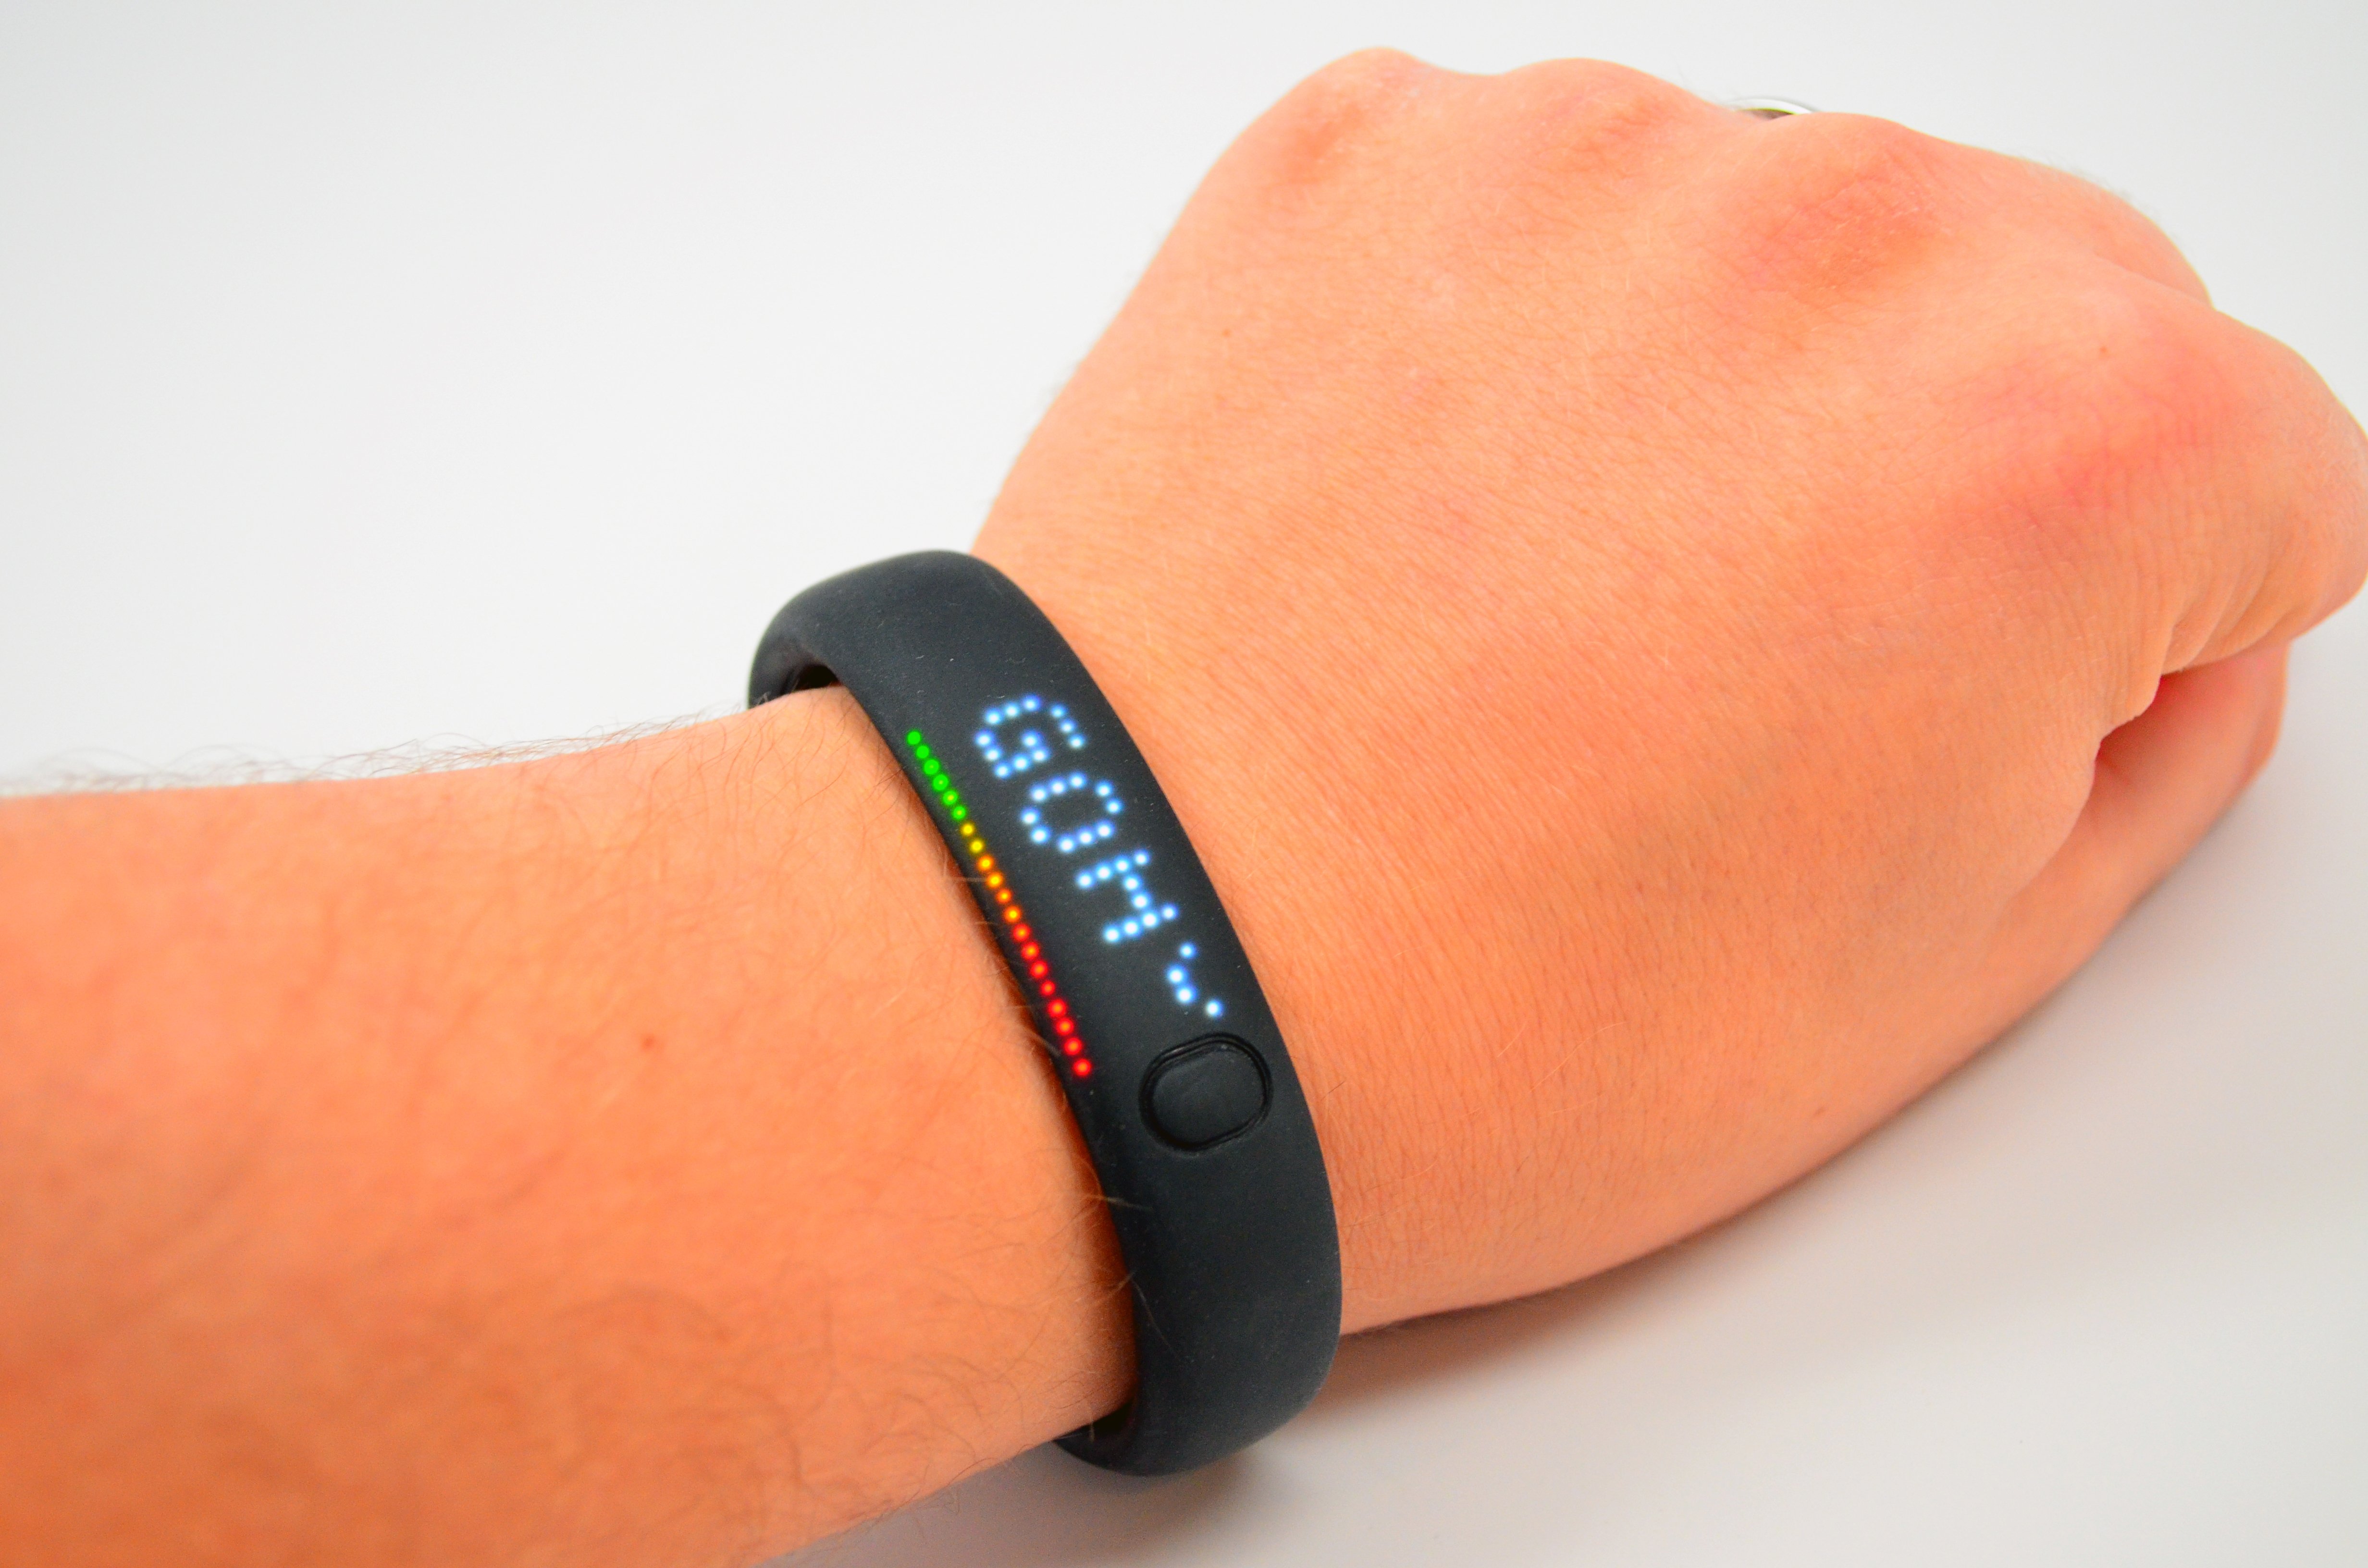 Nike FuelBand 2: Rate Monitor & Support